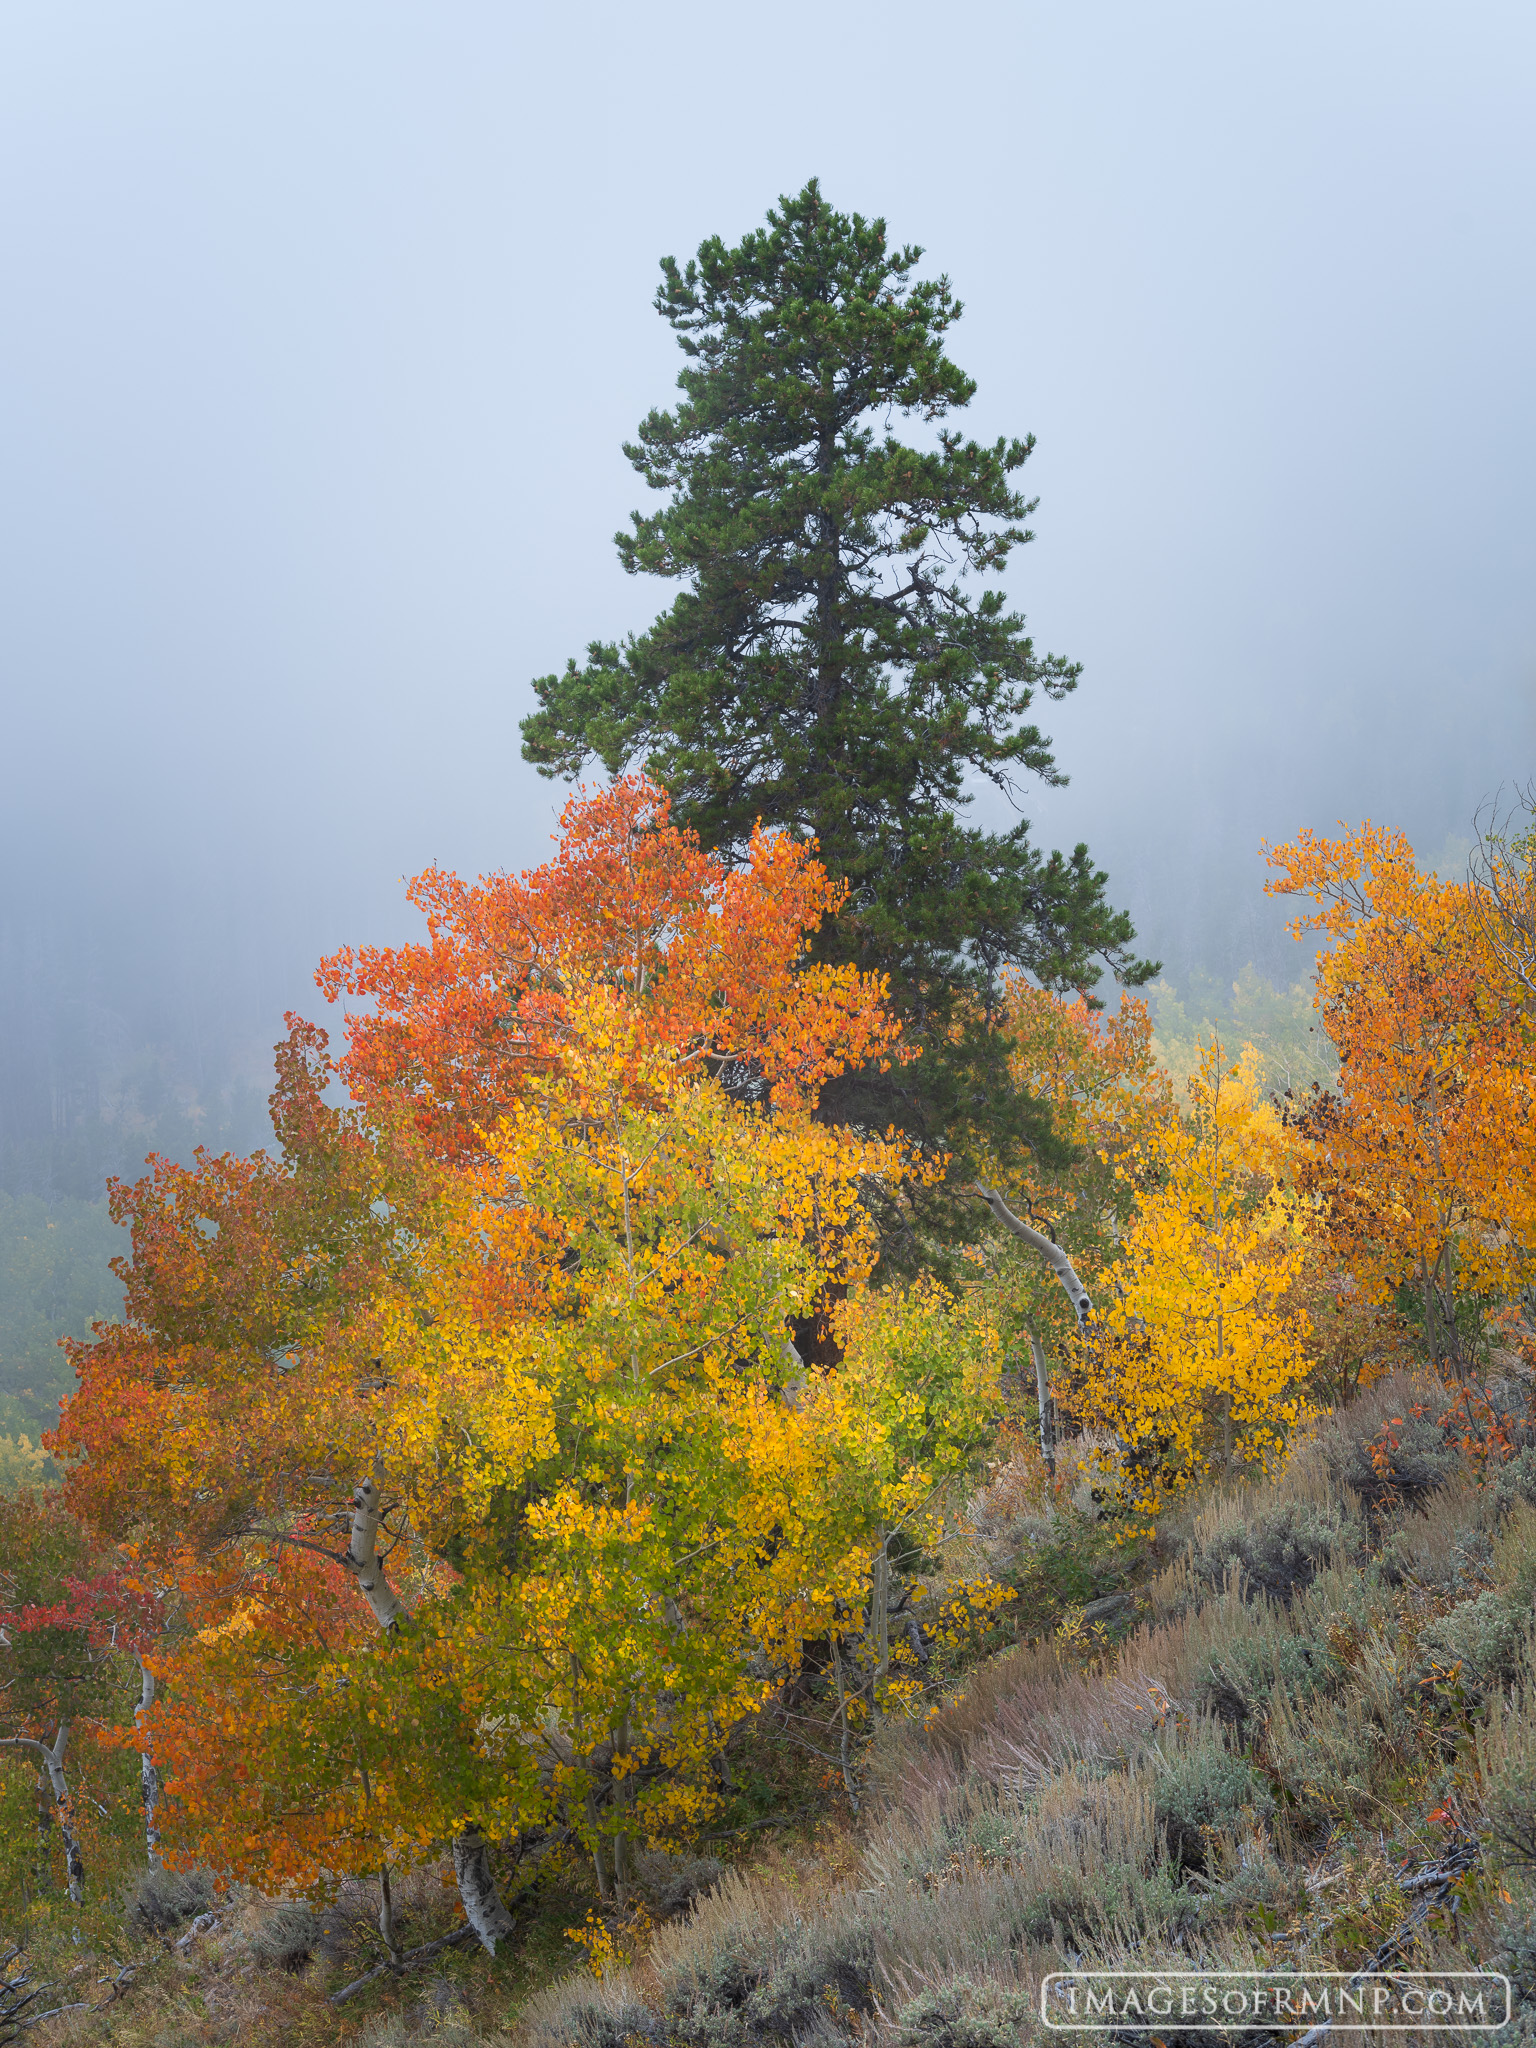 On a foggy autumn morning, the colors along the Bierstadt Moraine were showing off so many different hues as they gathered around...